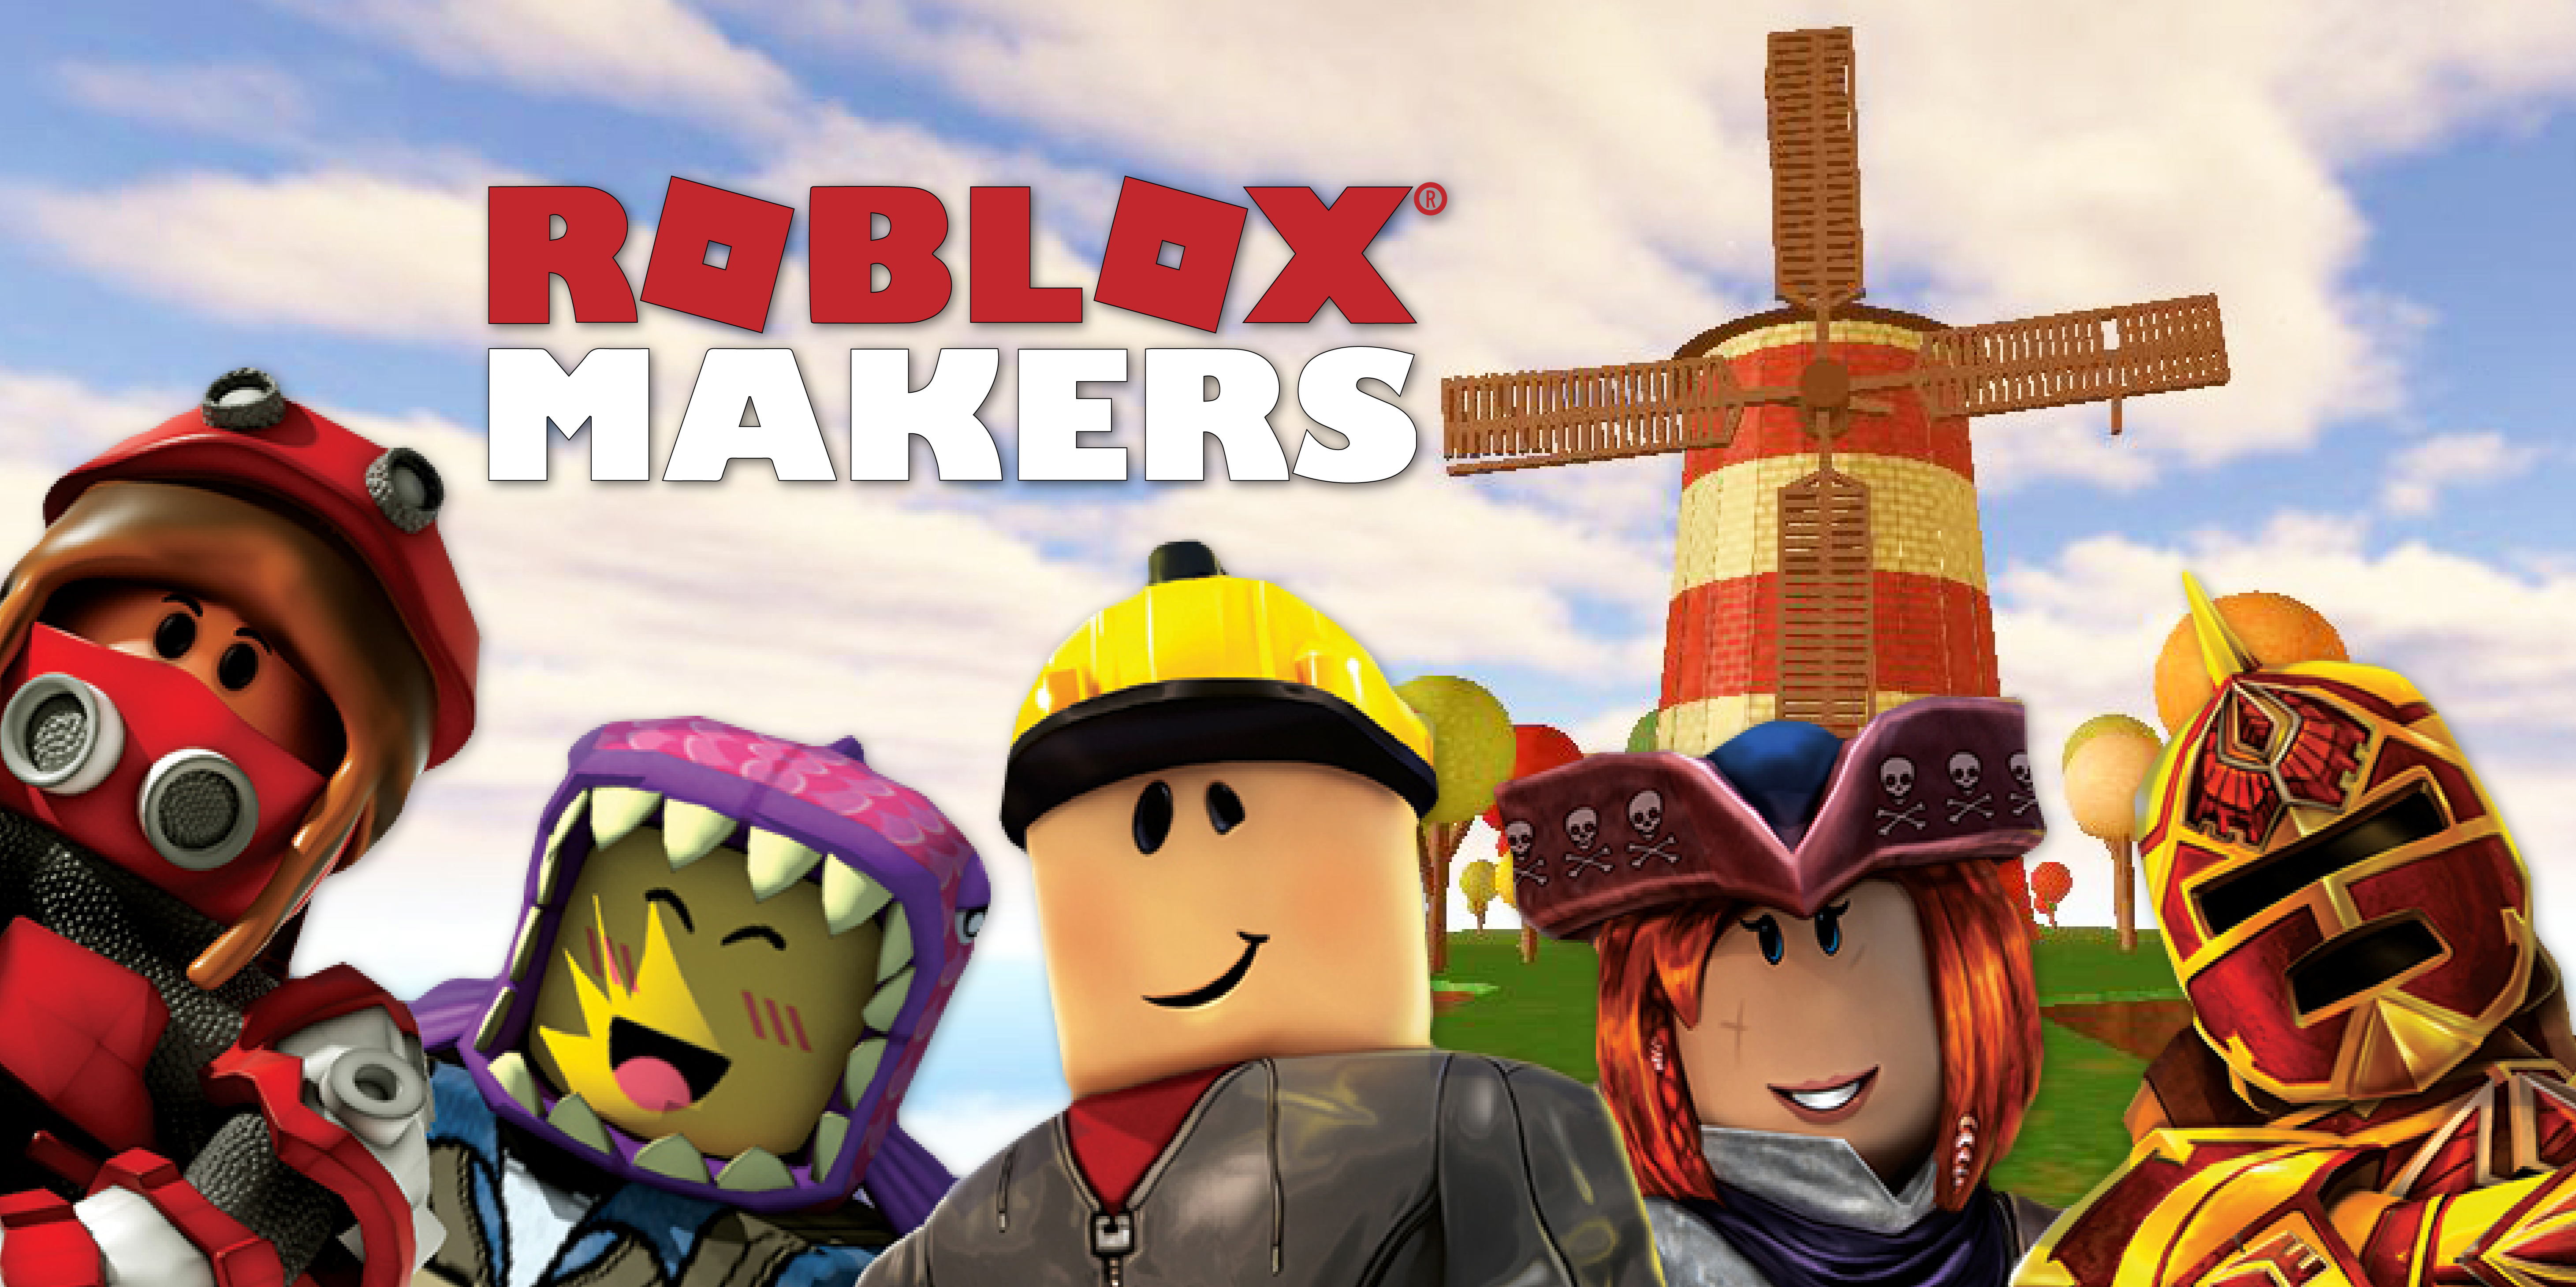 ROBLOX® Makers